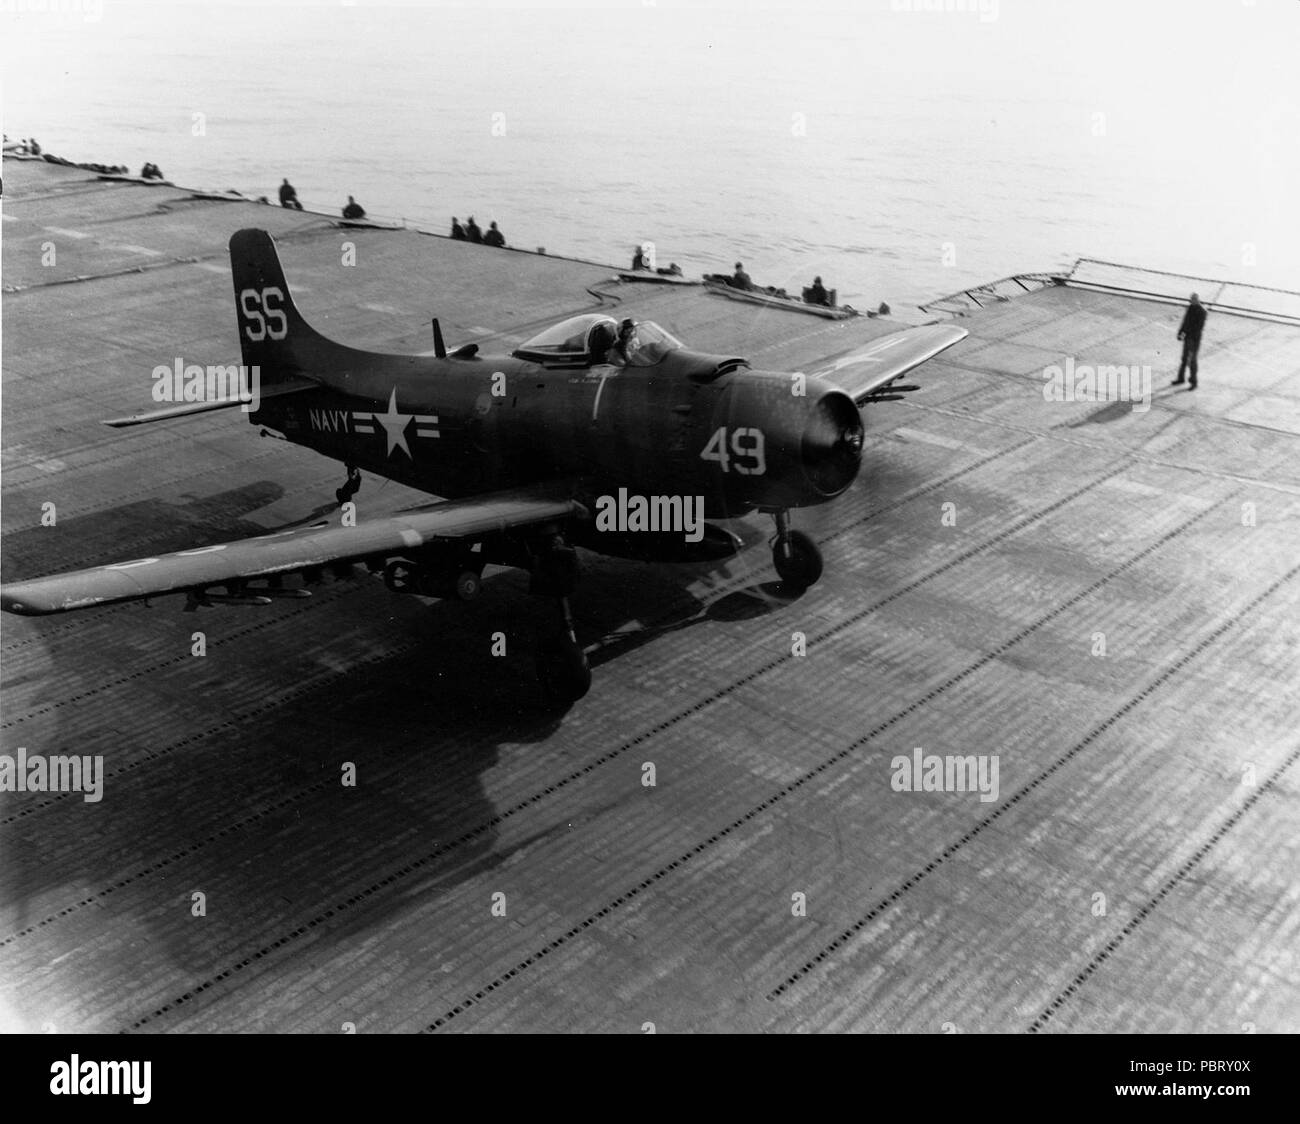 AD-3Q from VC-33 on carrier in early 1950s. Stock Photo